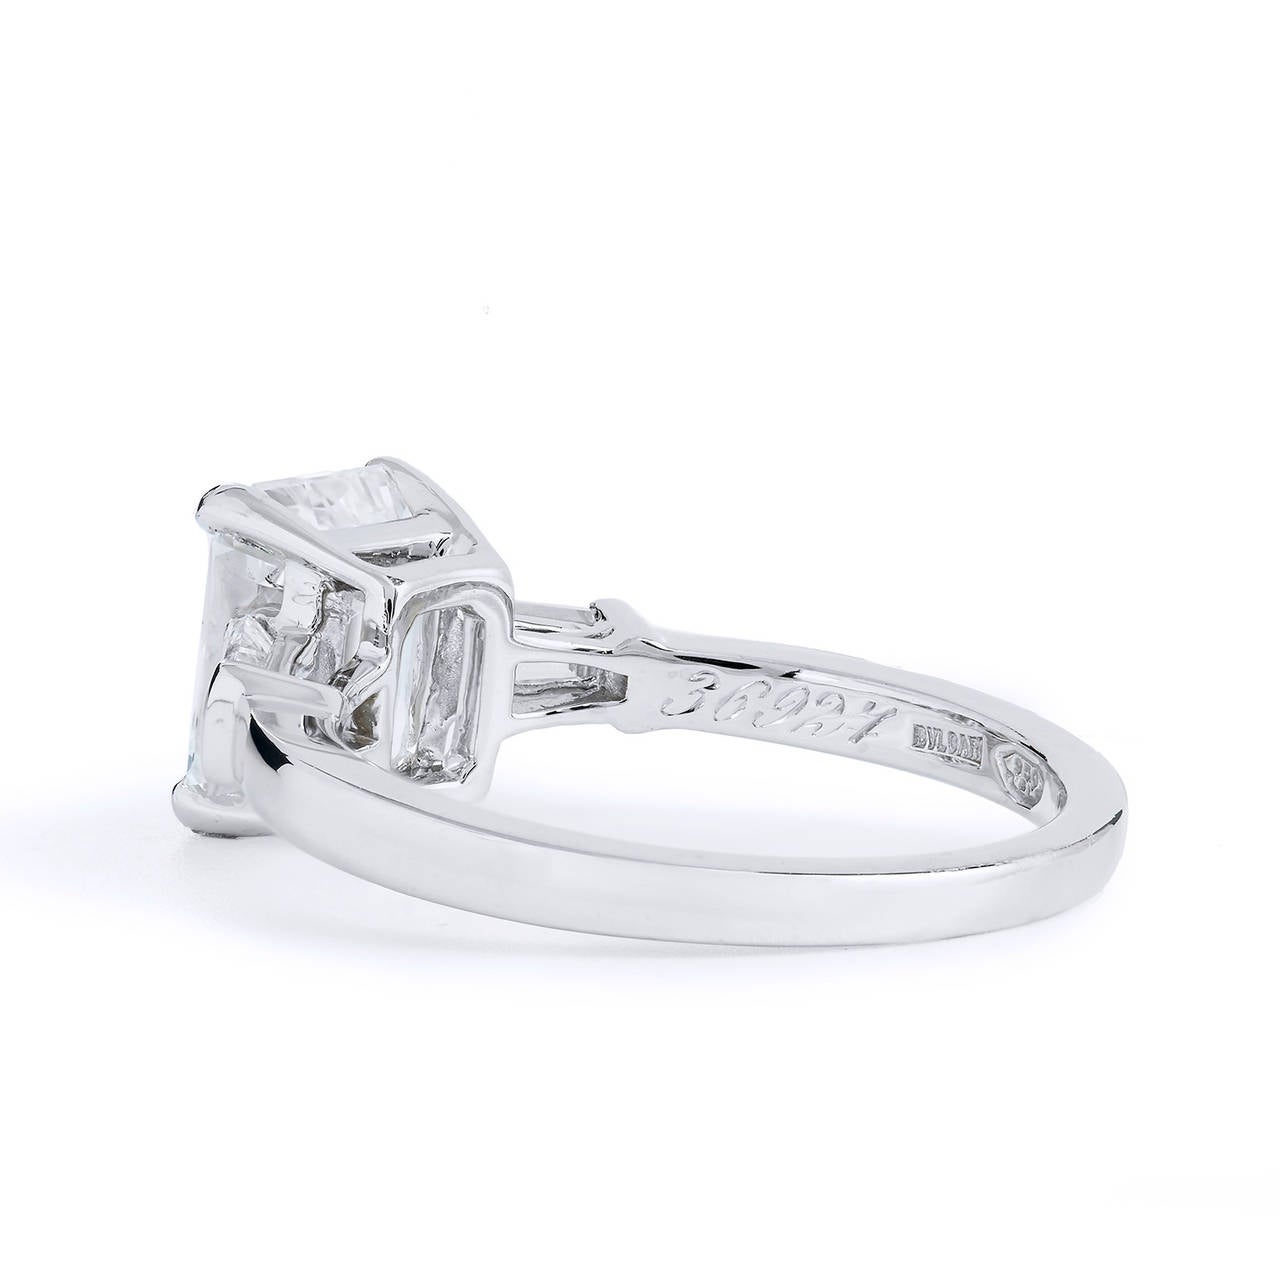 Bvlgari immortalizes beauty once again with this platinum GIA certified diamond ring. Capturing the true essence of elegance and femininity, this stunning ring showcases a 2.01 E-SI1 emerald cut diamond embraced by two tapered baguettes weighing